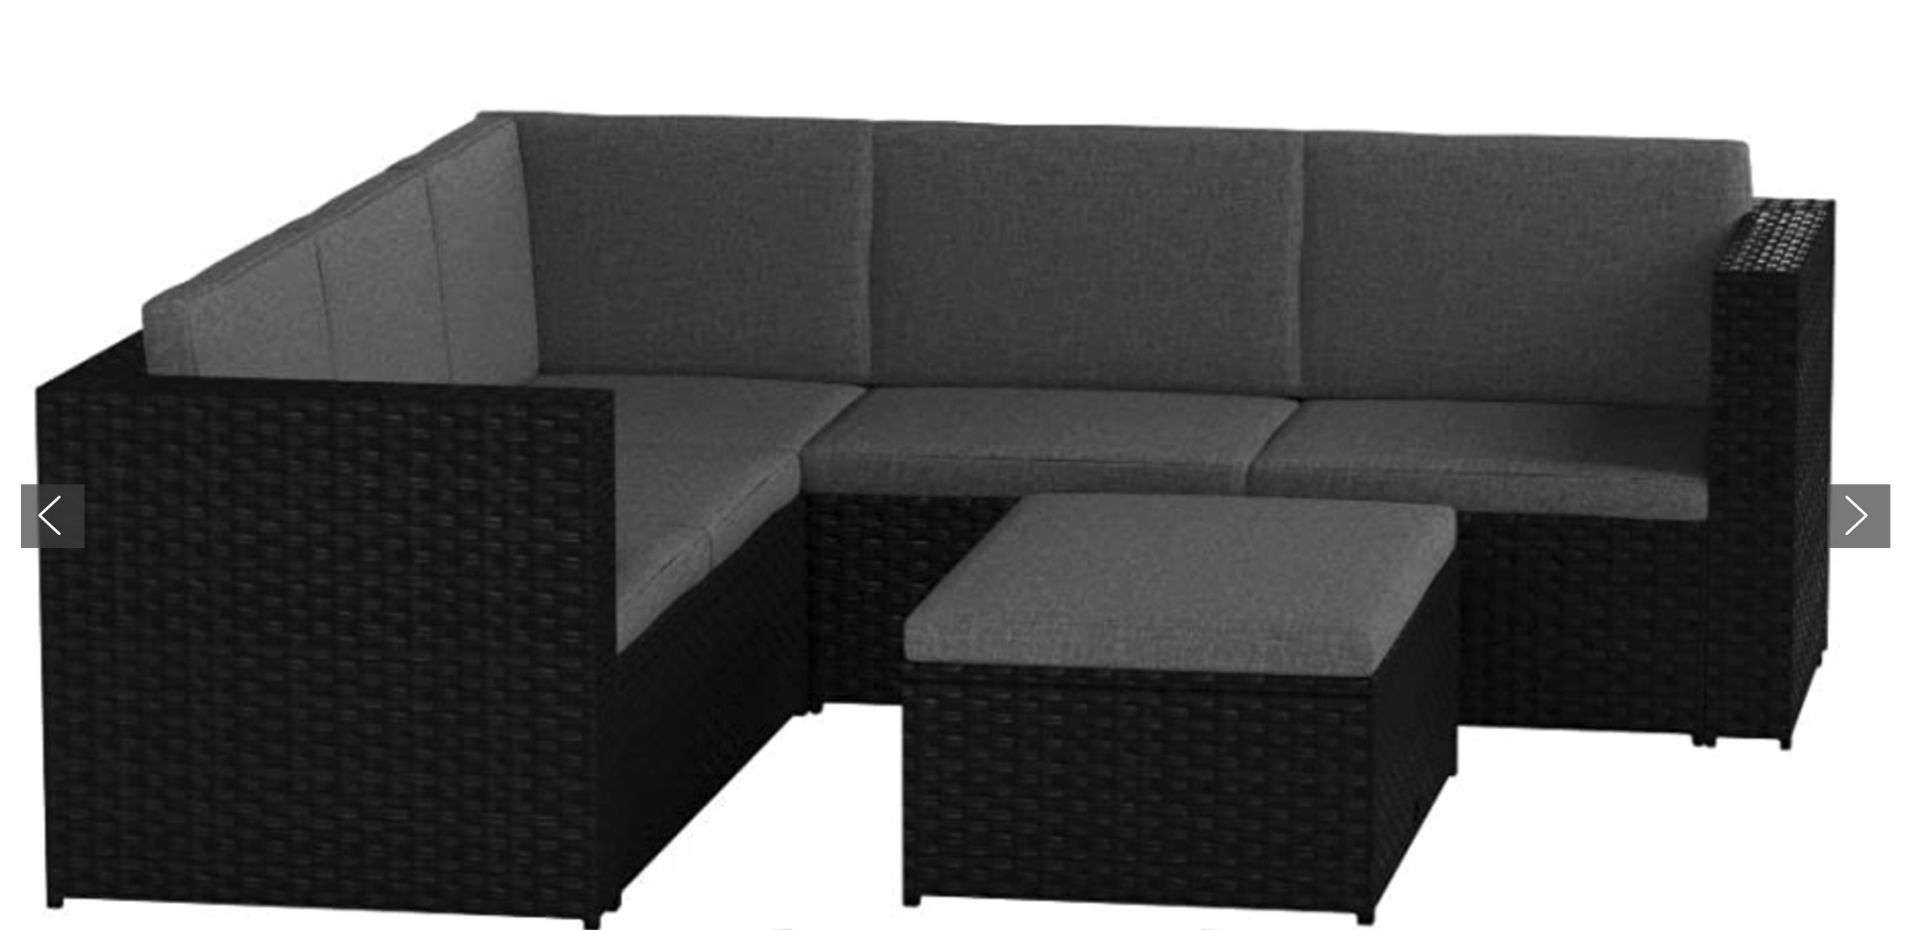 Black Garden Furniture Set- inc table and cushions- 16 pieces - Image 4 of 7